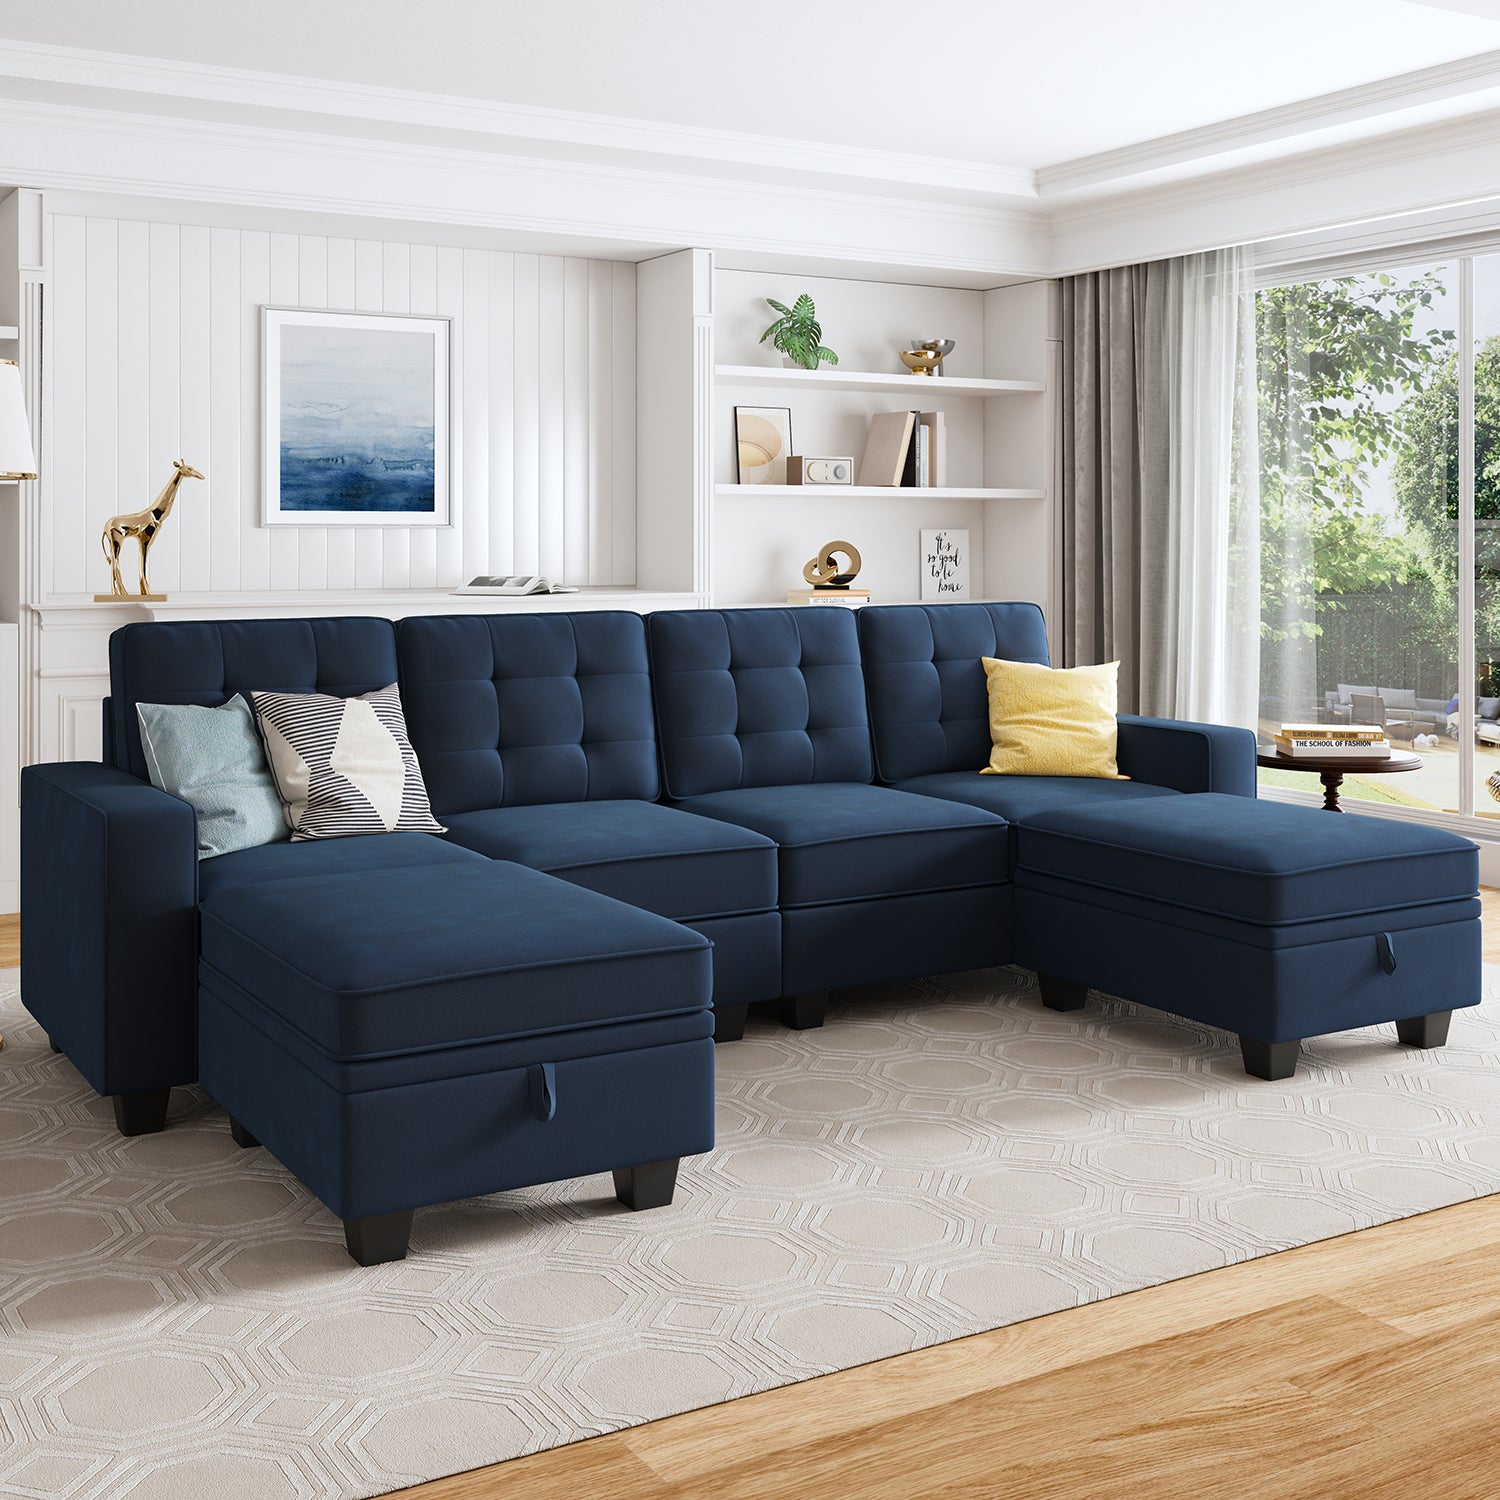 HONBAY 6-Piece Velvet Convertible Sectional With Storage Ottoman